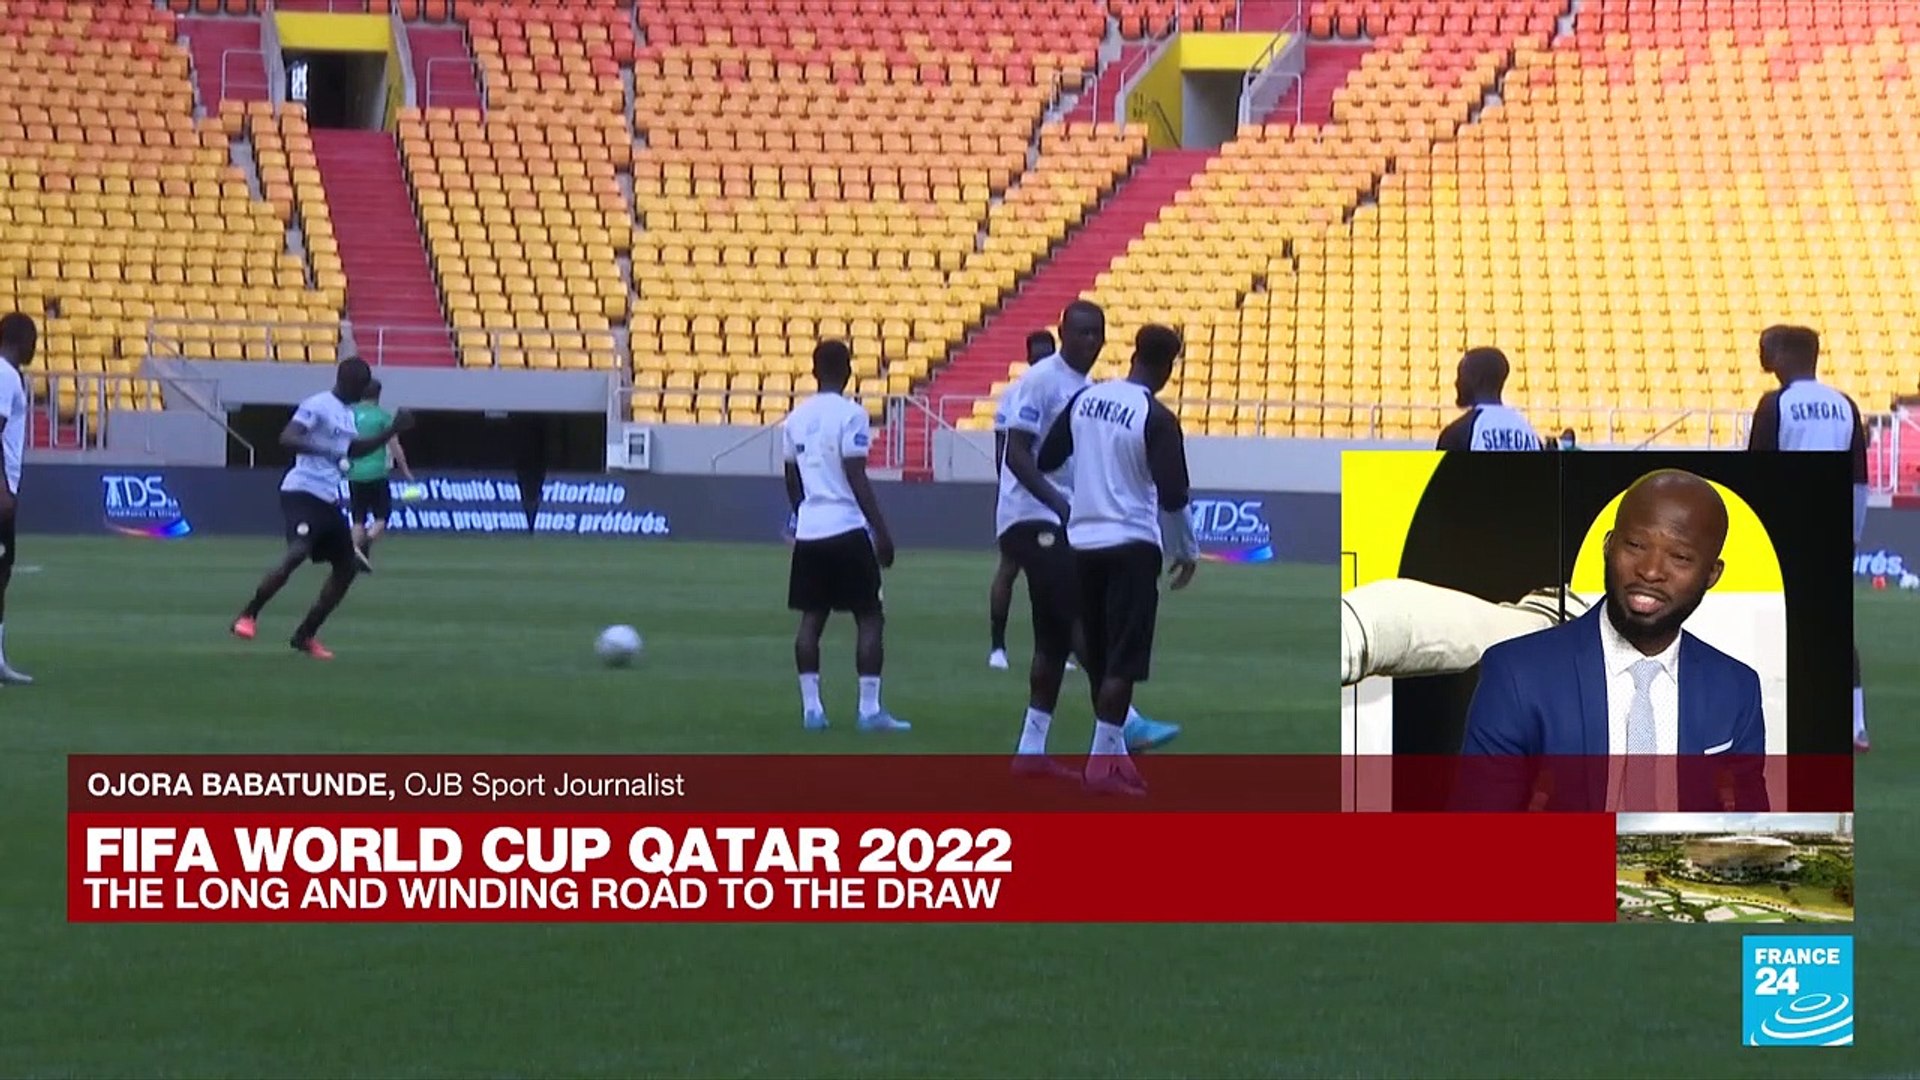 REPLAY - FIFA World Cup Qatar 2022 The long and winding road to the draw 